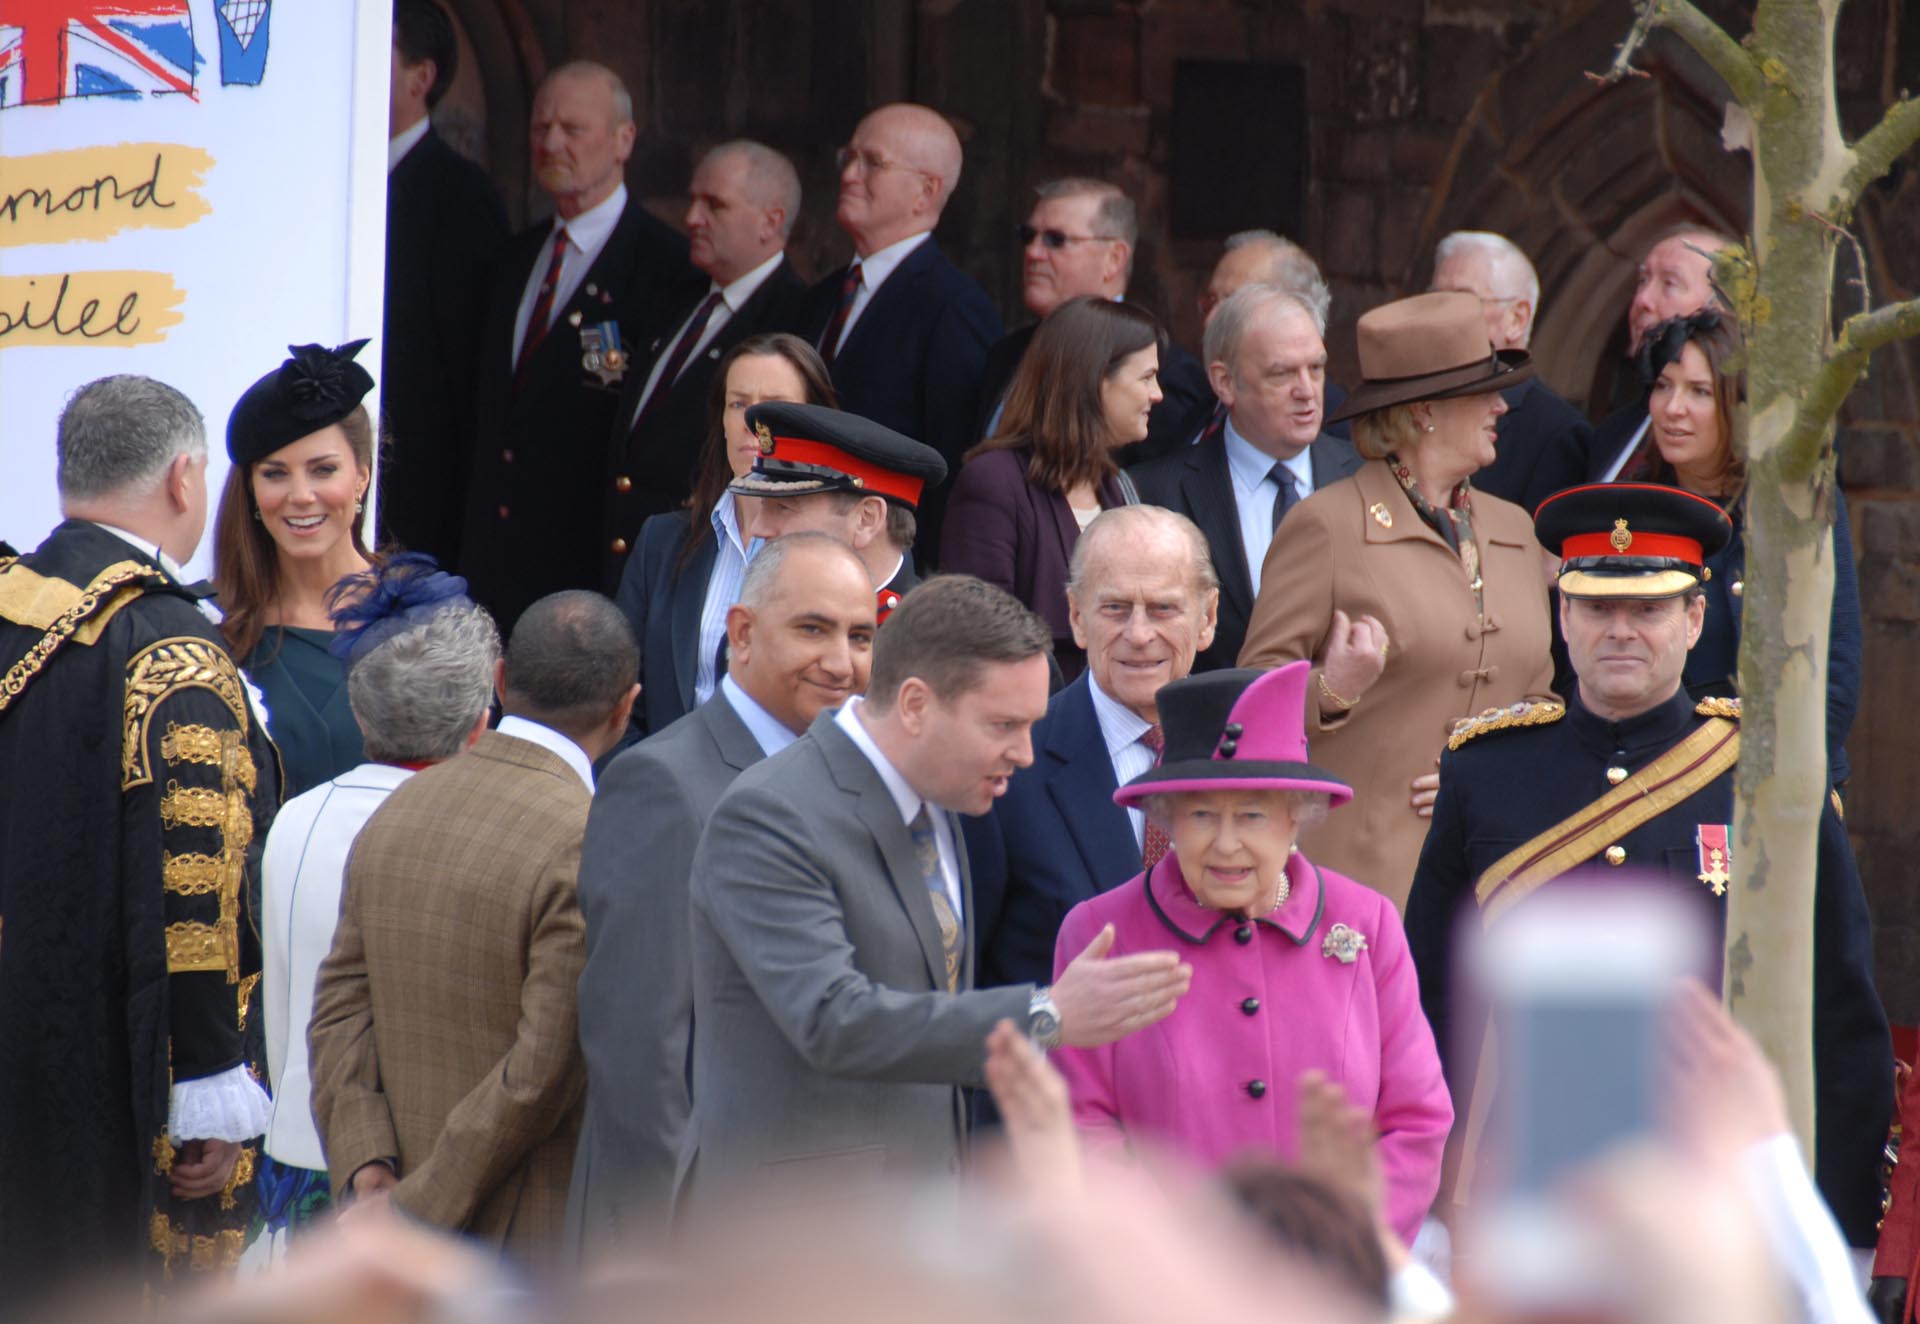 The Queen passing under the archway of The Magazine, Leicester, 2012 - 